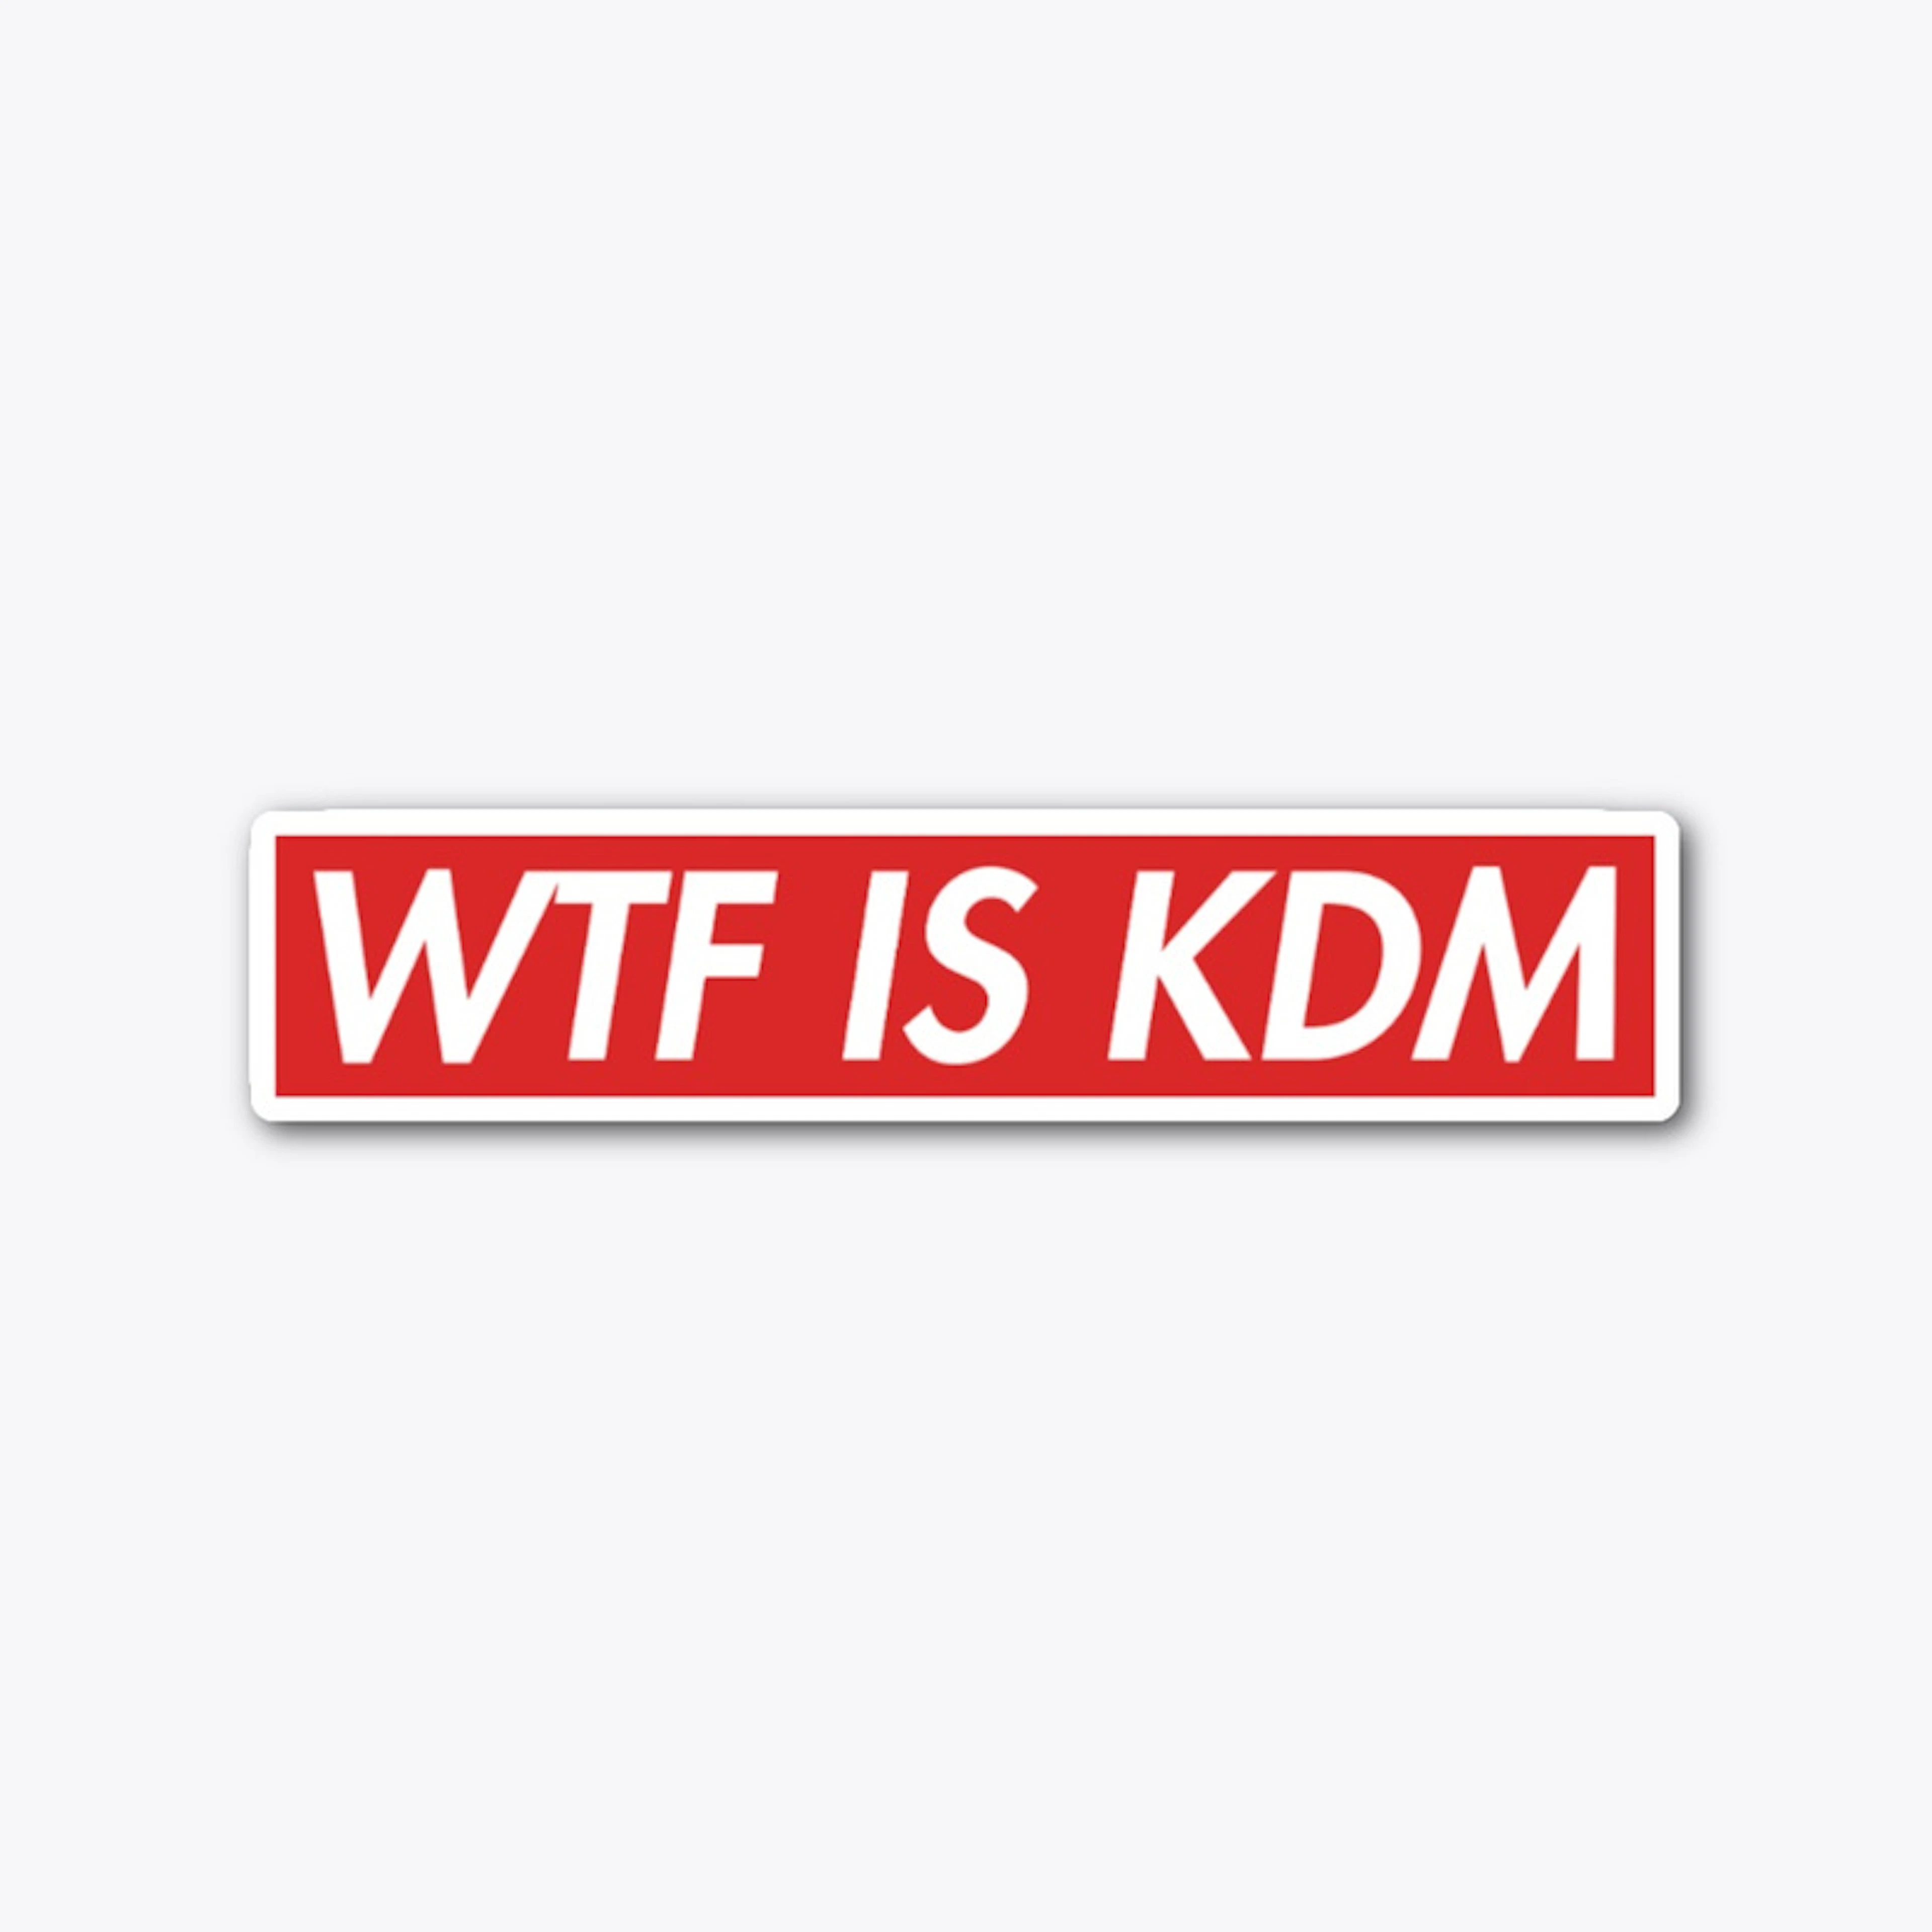 WTF IS KDM - Red Version